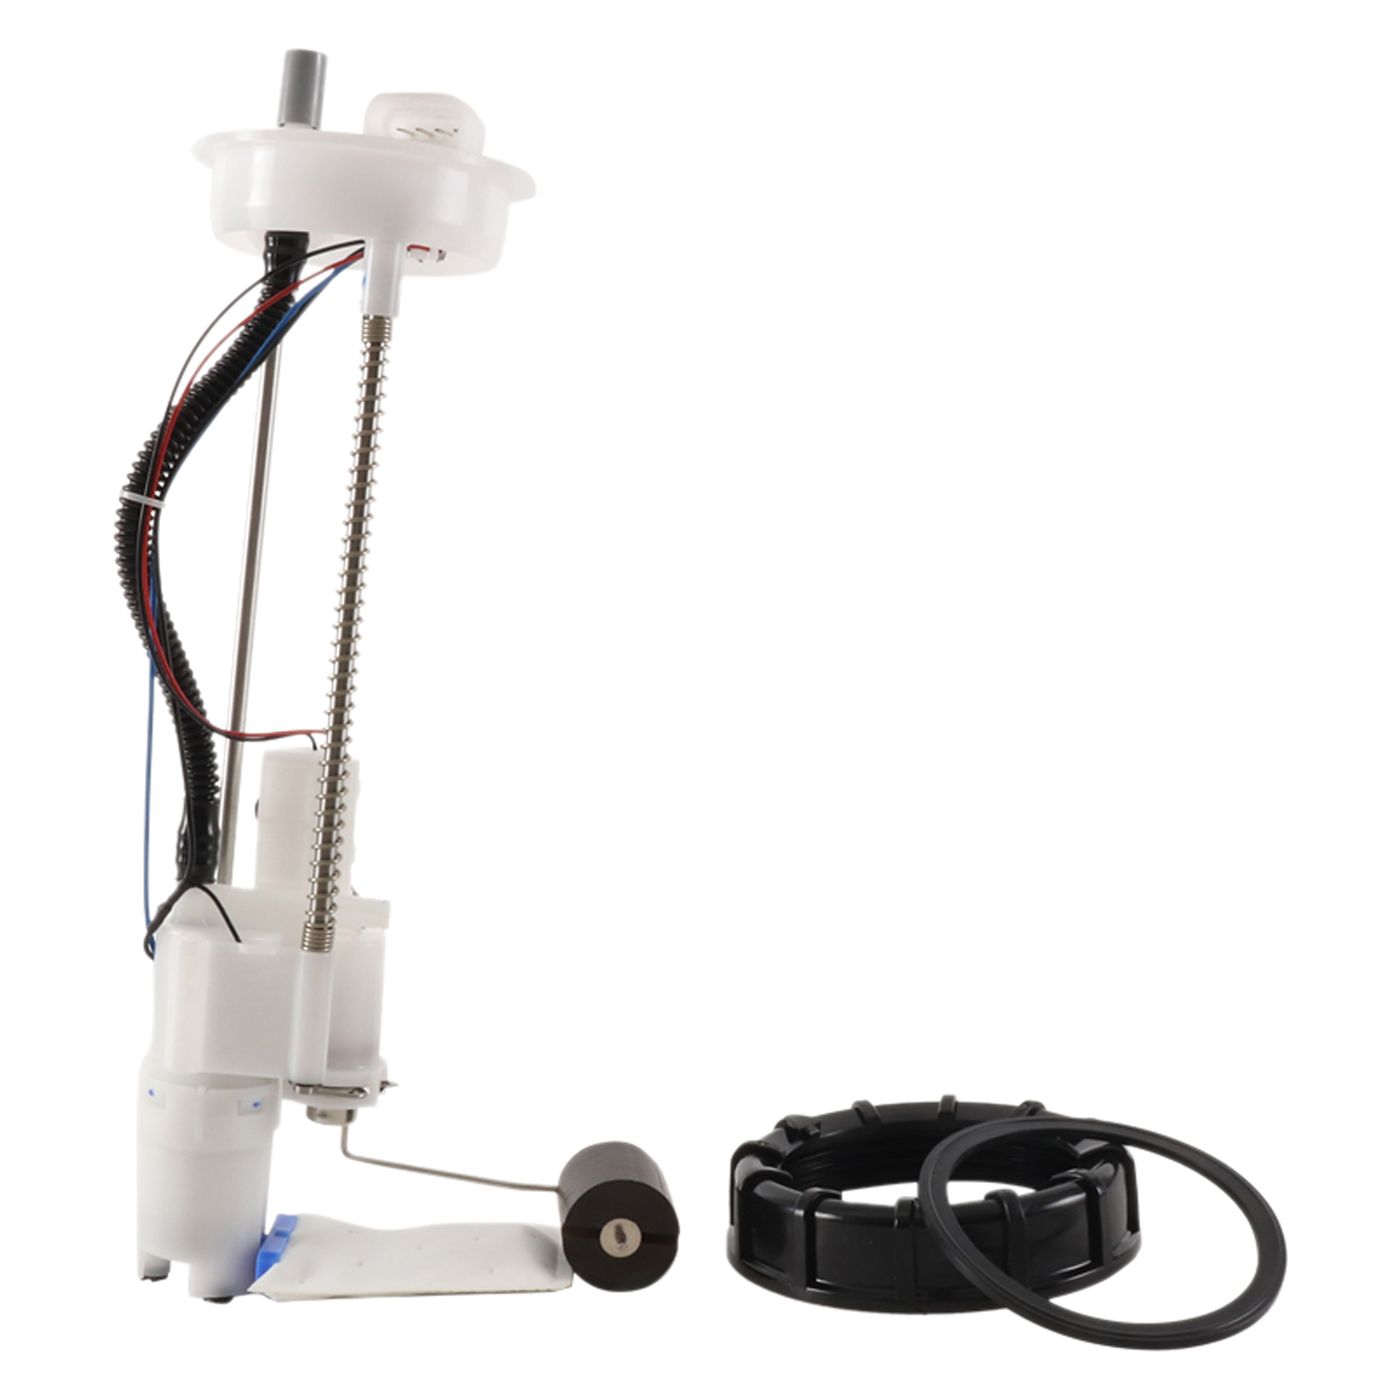 Wrp Fuel Pump Modules - WRP471002 image